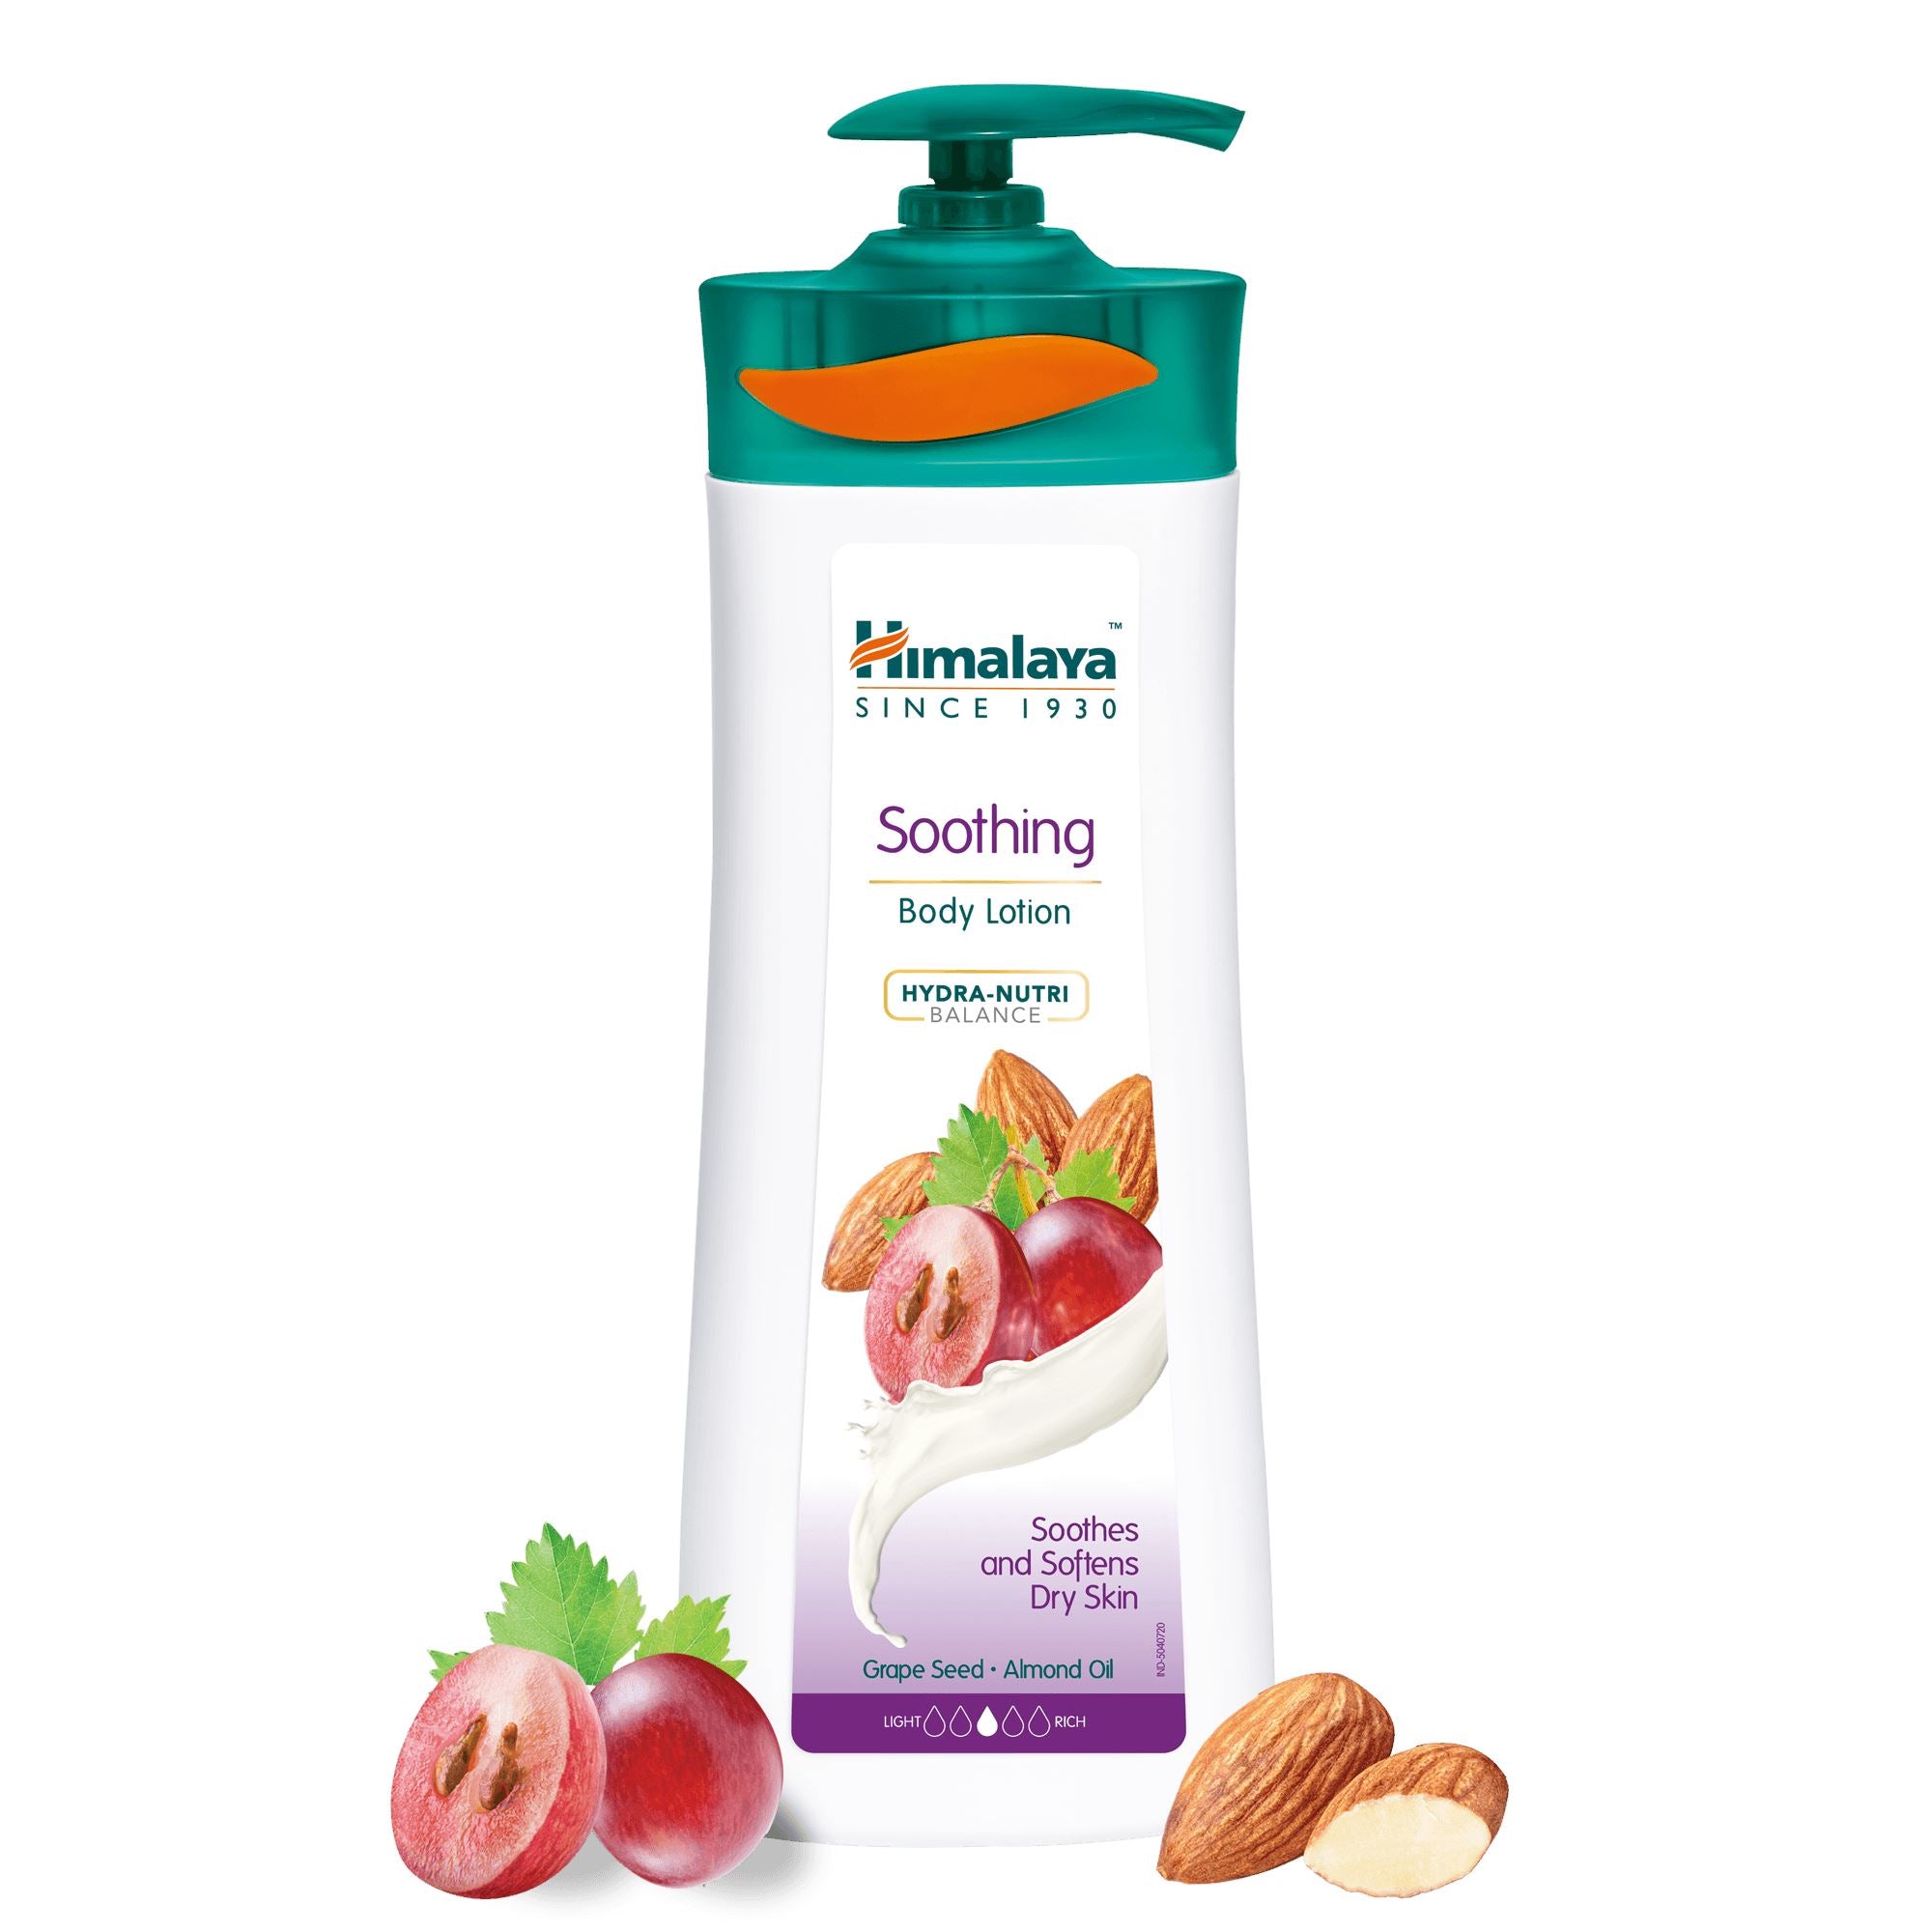 Himalaya Soothing Body Lotion 400ml - Soothes and softens dry skin